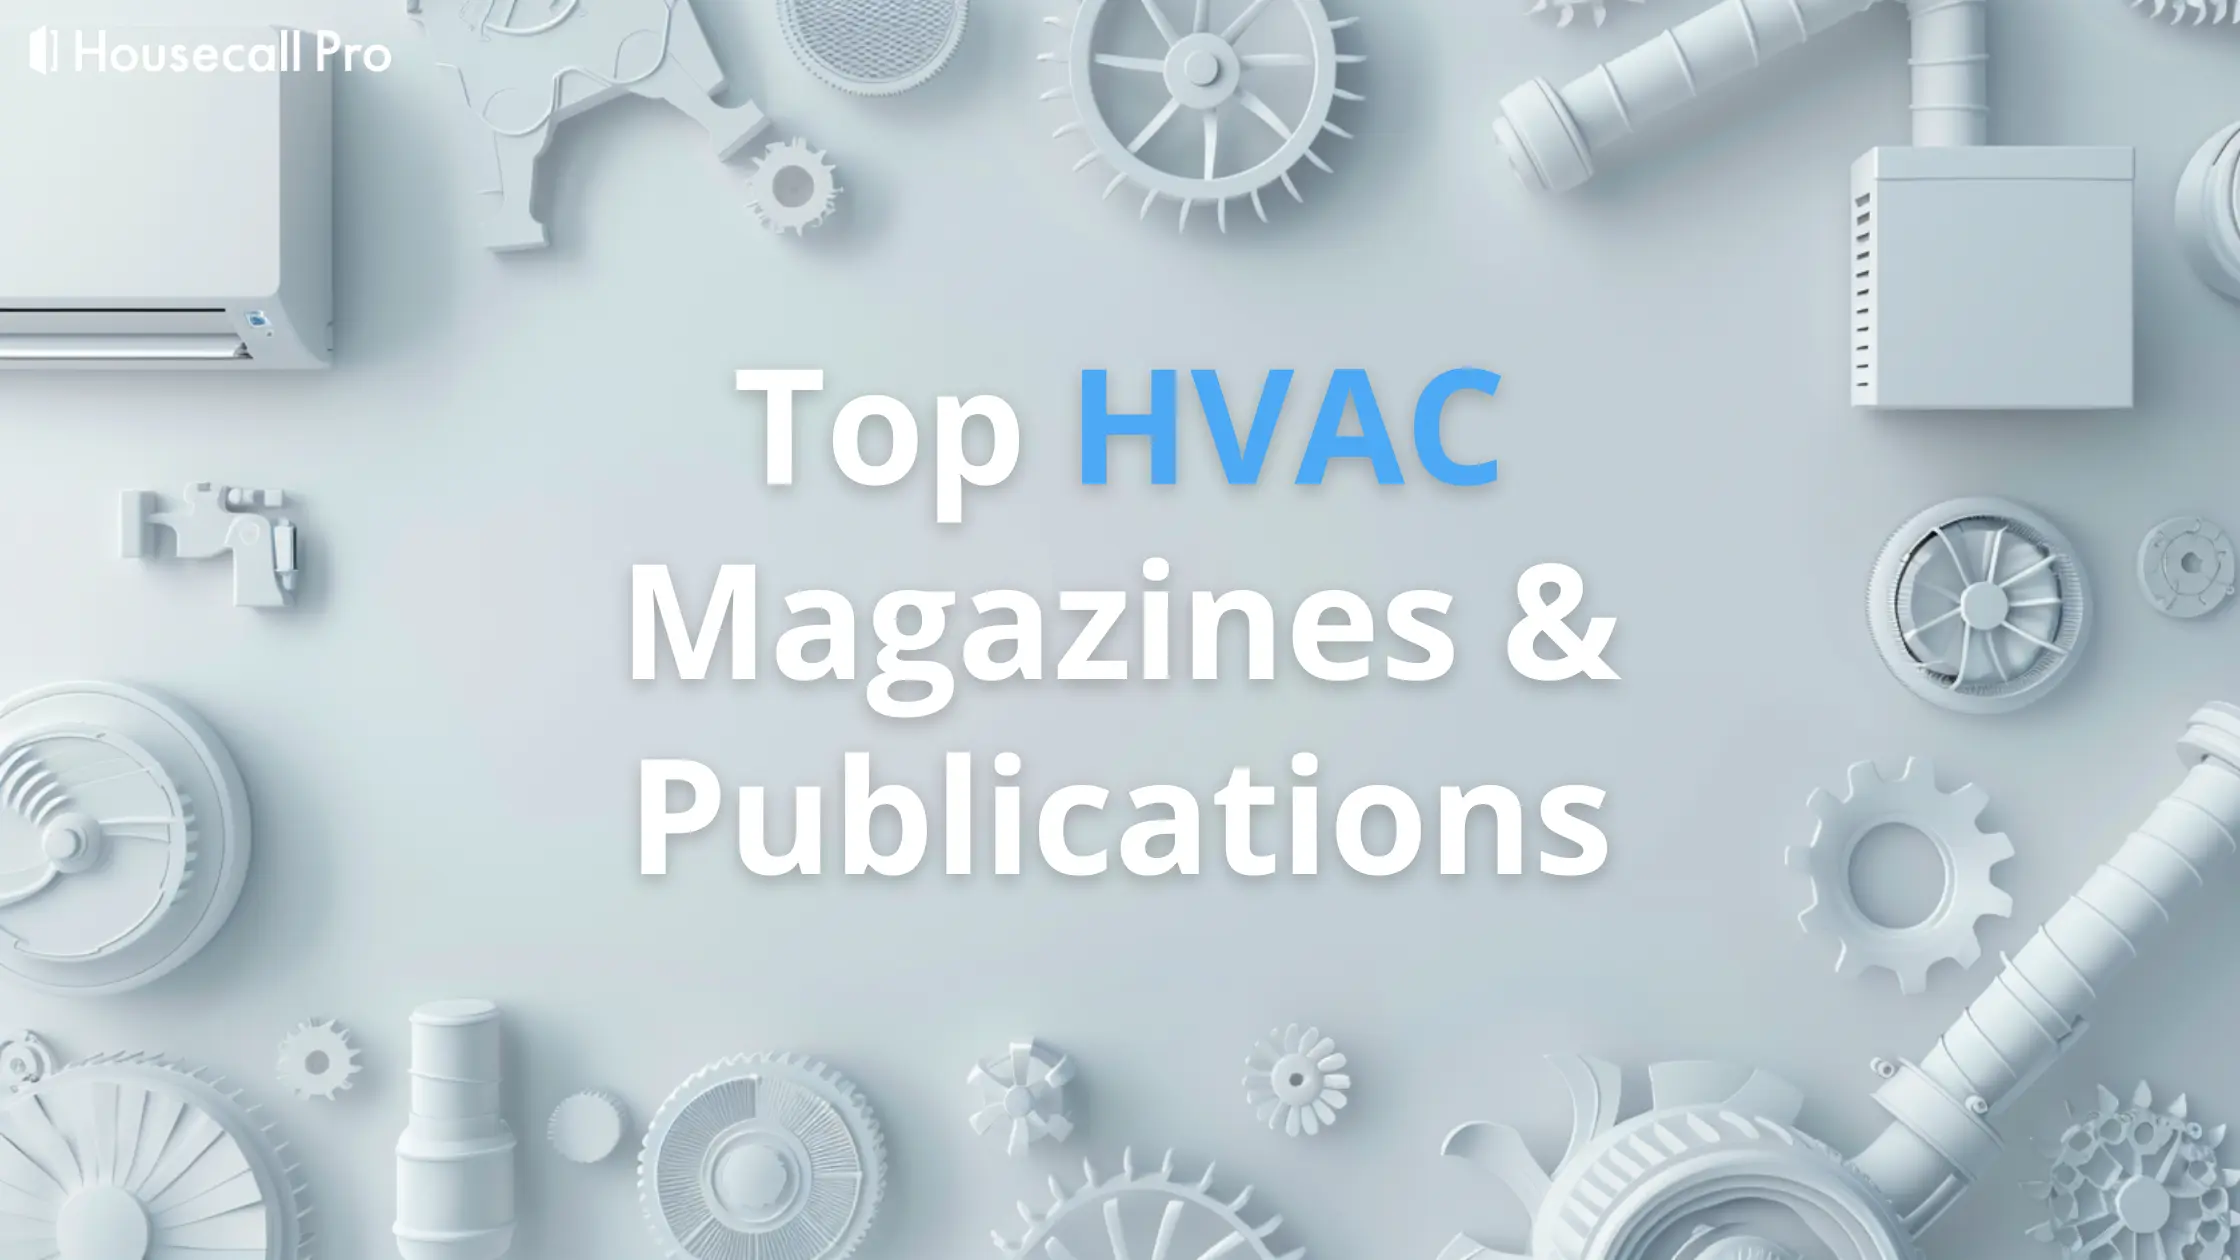 13 Top HVAC Magazines & Publications to Follow for Industry News